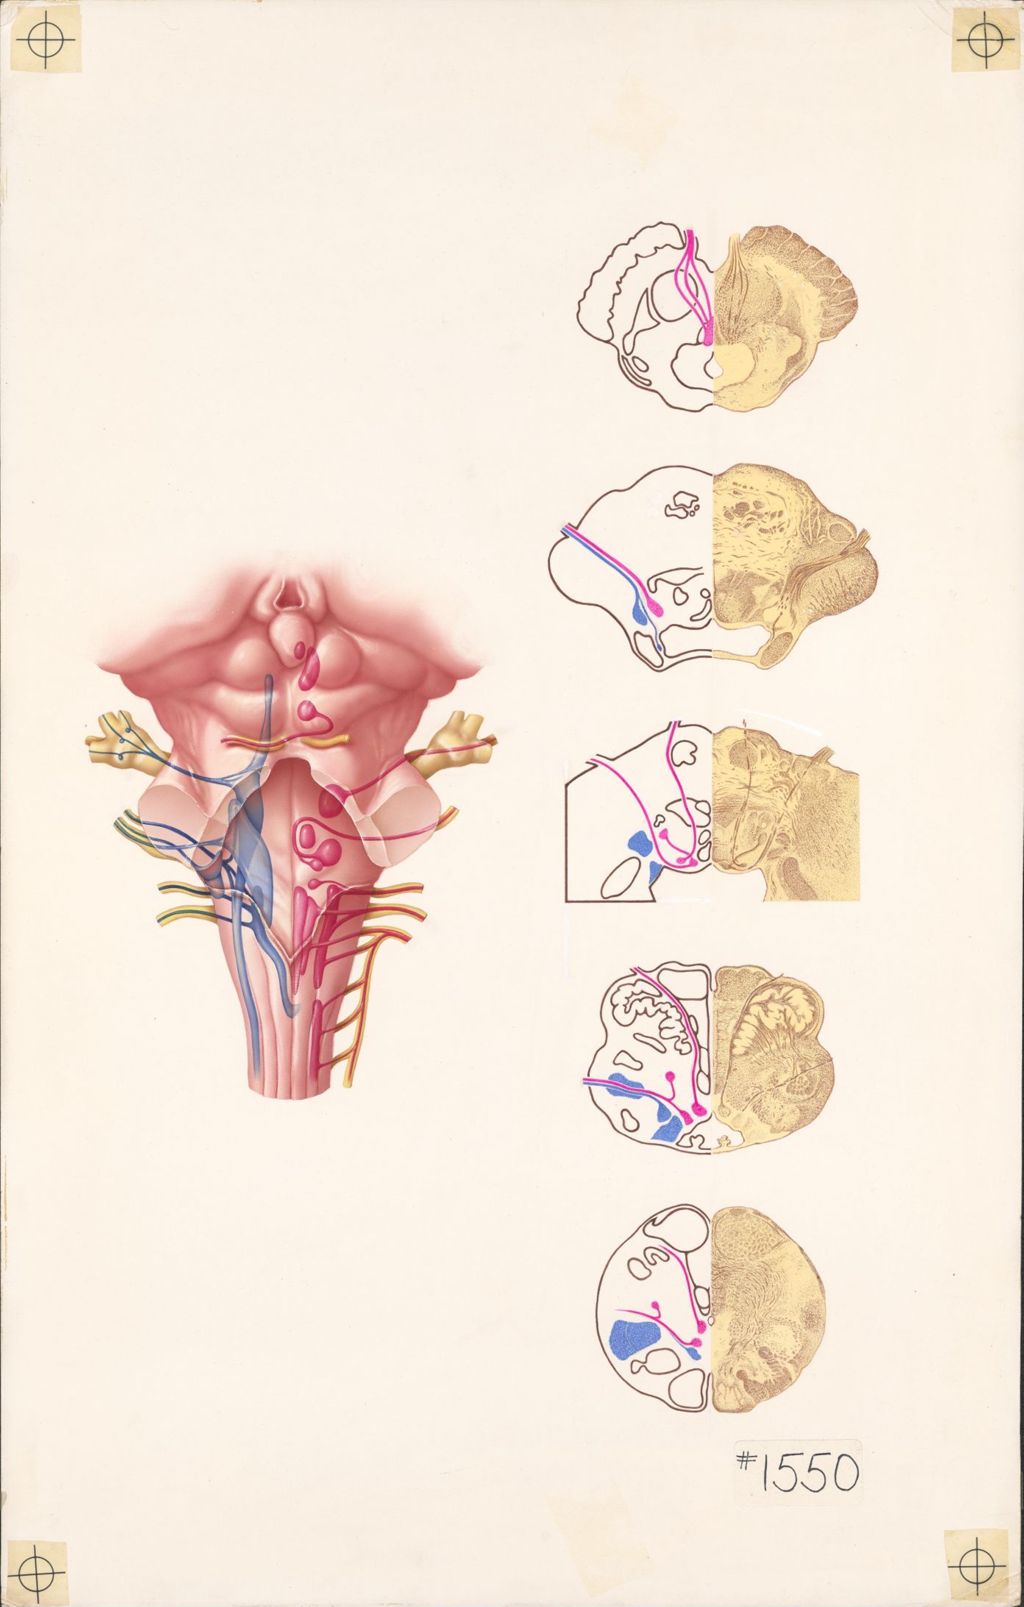 Medical profiles, the brain stem and cranial nerves, plate 2, the cranial nerve nuclei